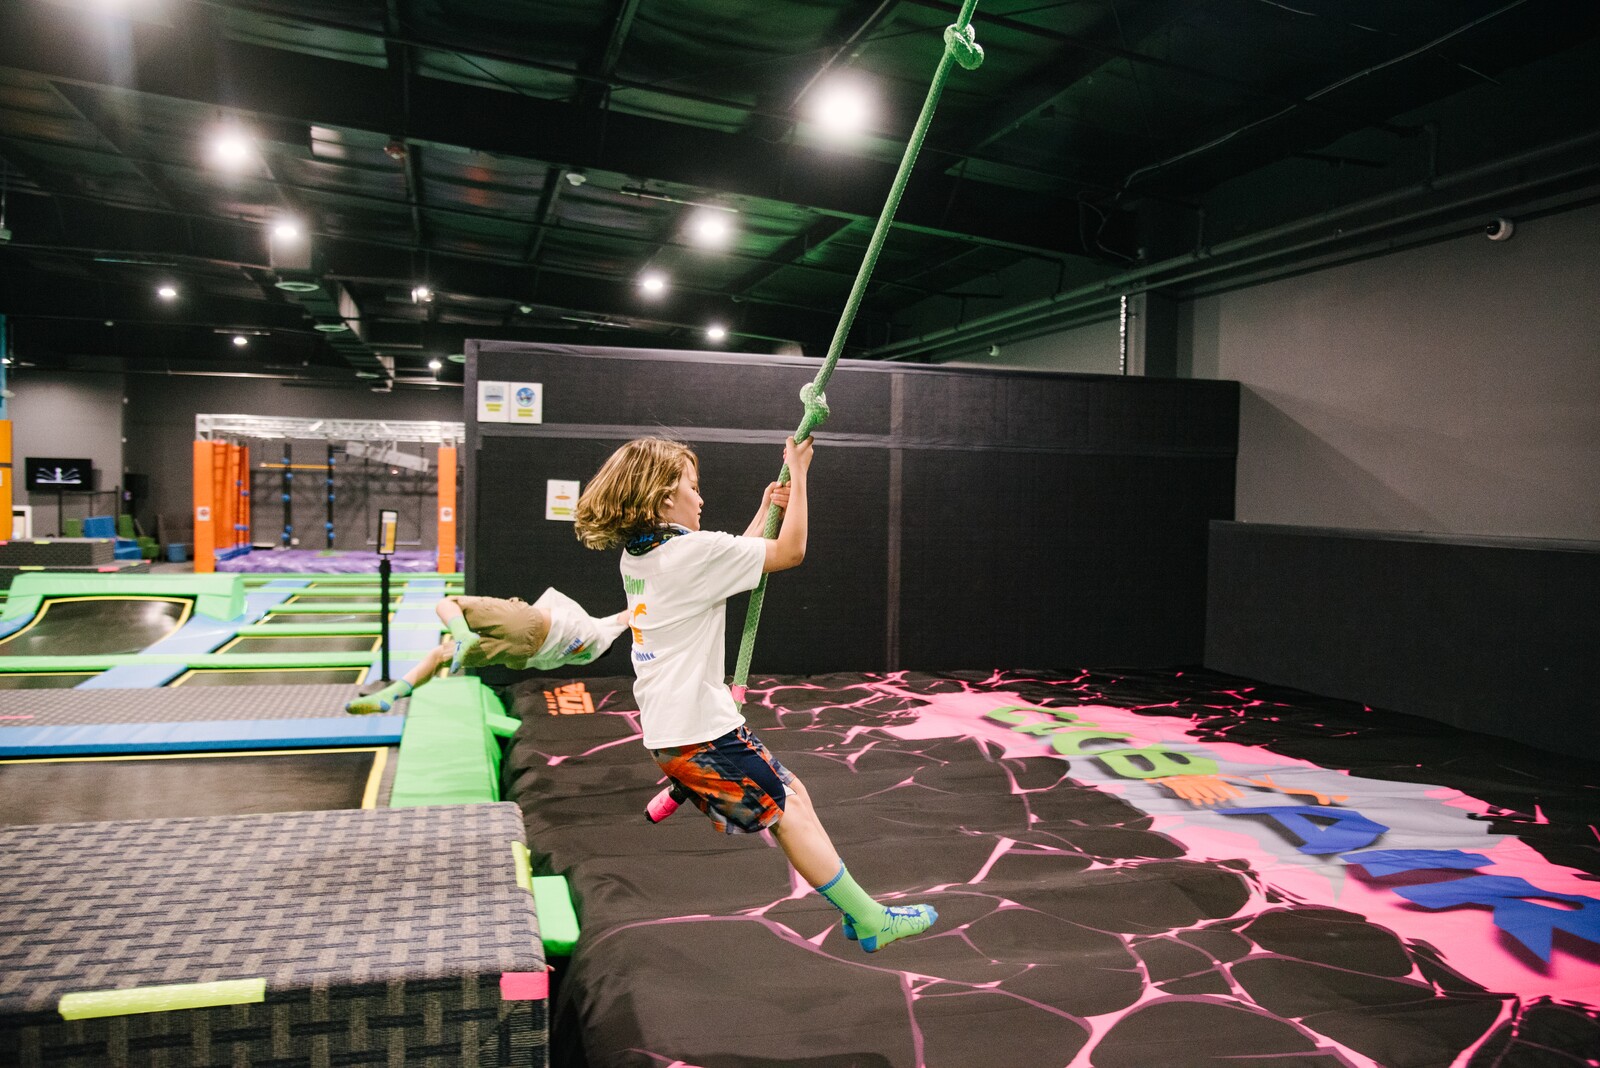 Defy Gravity finally brings indoor trampoline park to Lincoln